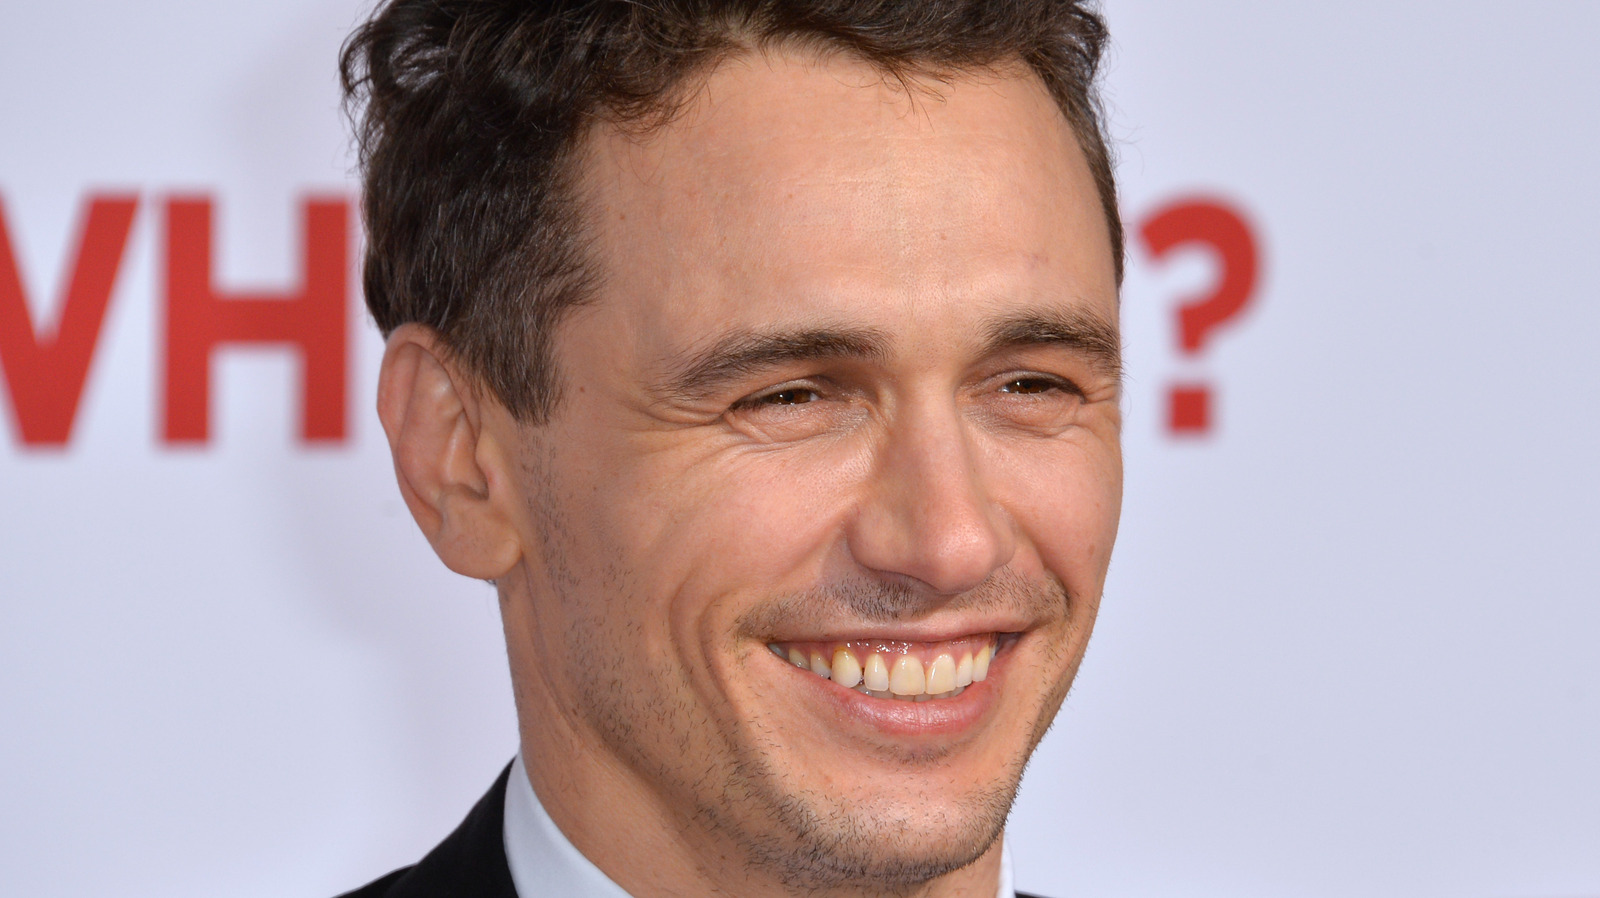 James Franco's Net Worth May Surprise You